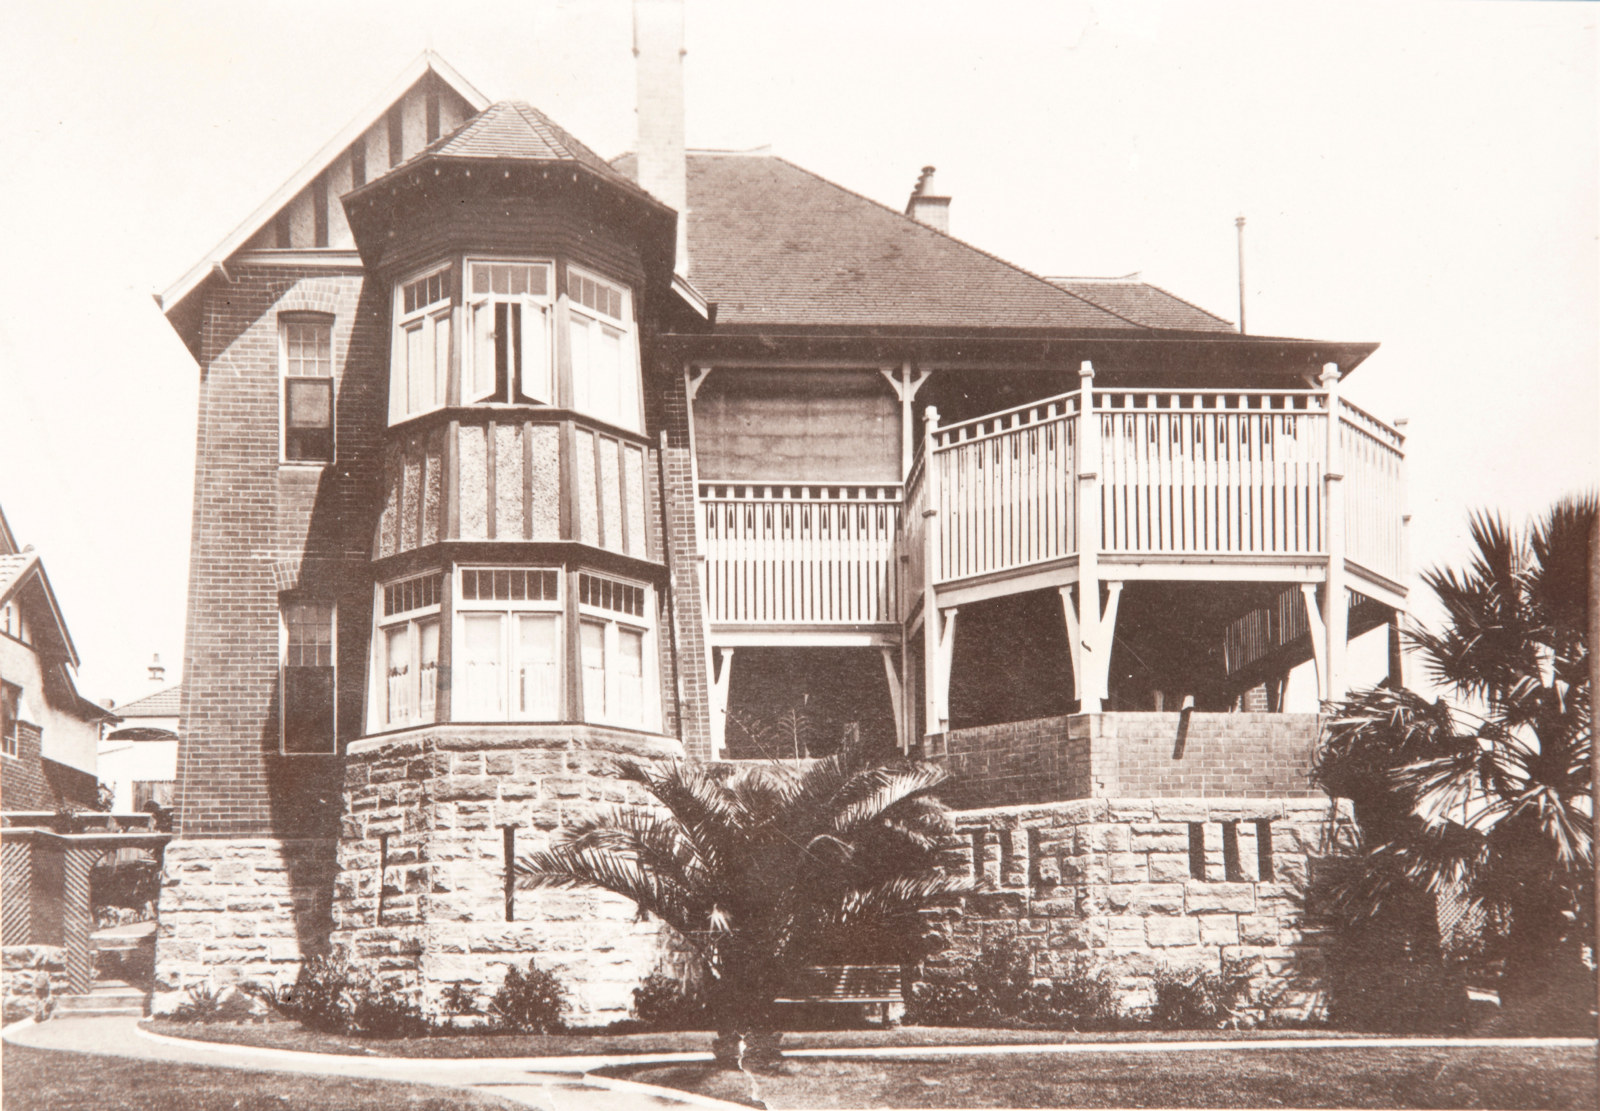 Black and white photo of two storey sandstone base house with verandahs.